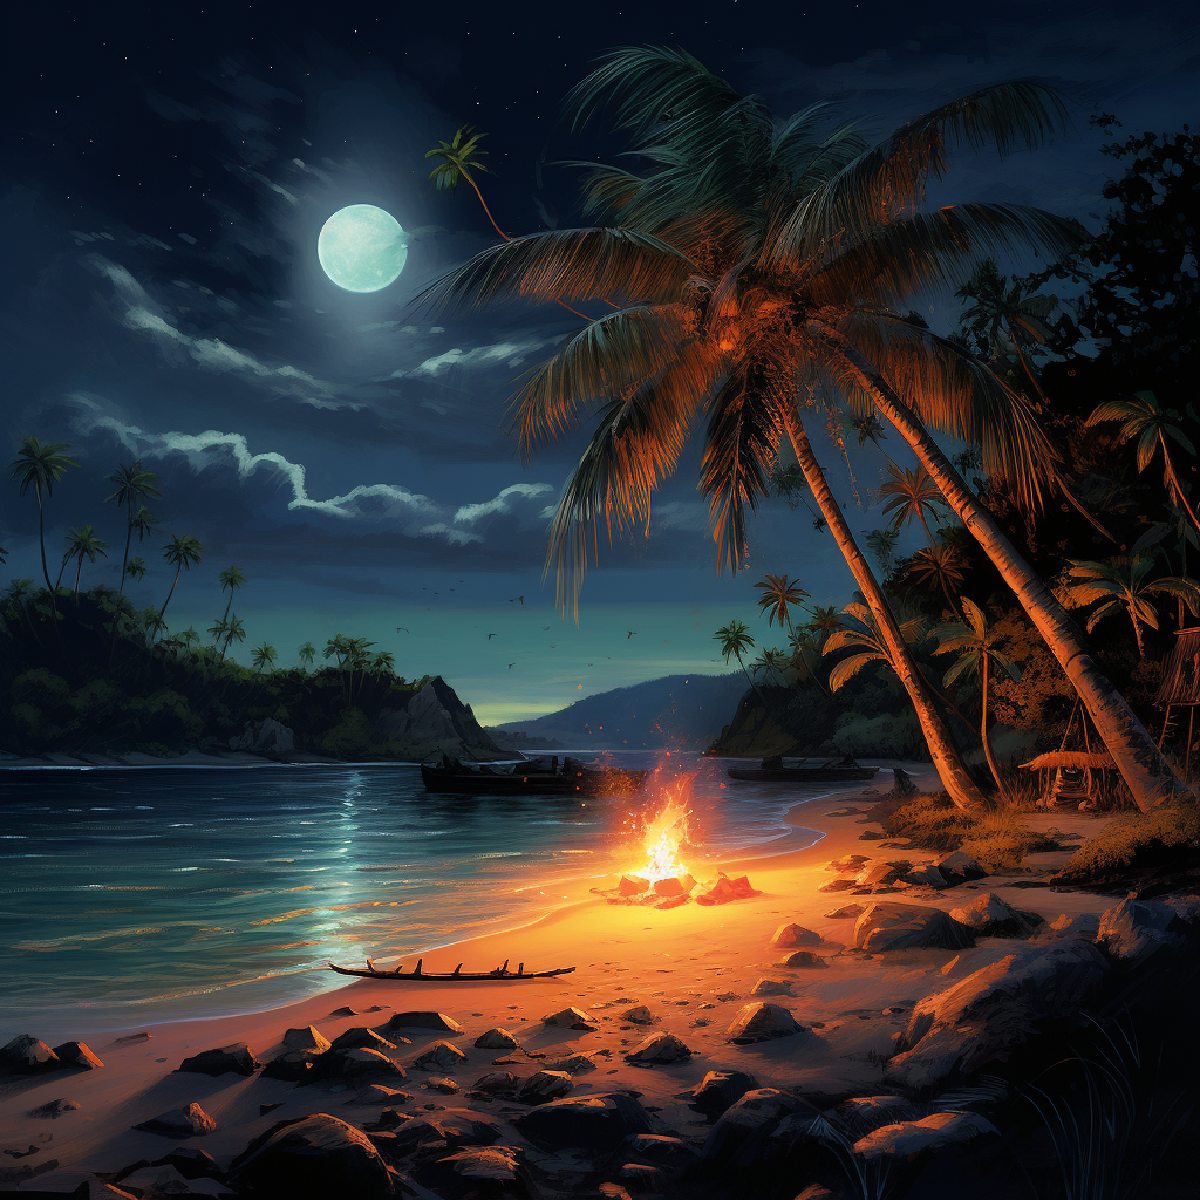 Illustration of campfire on a tropical beach